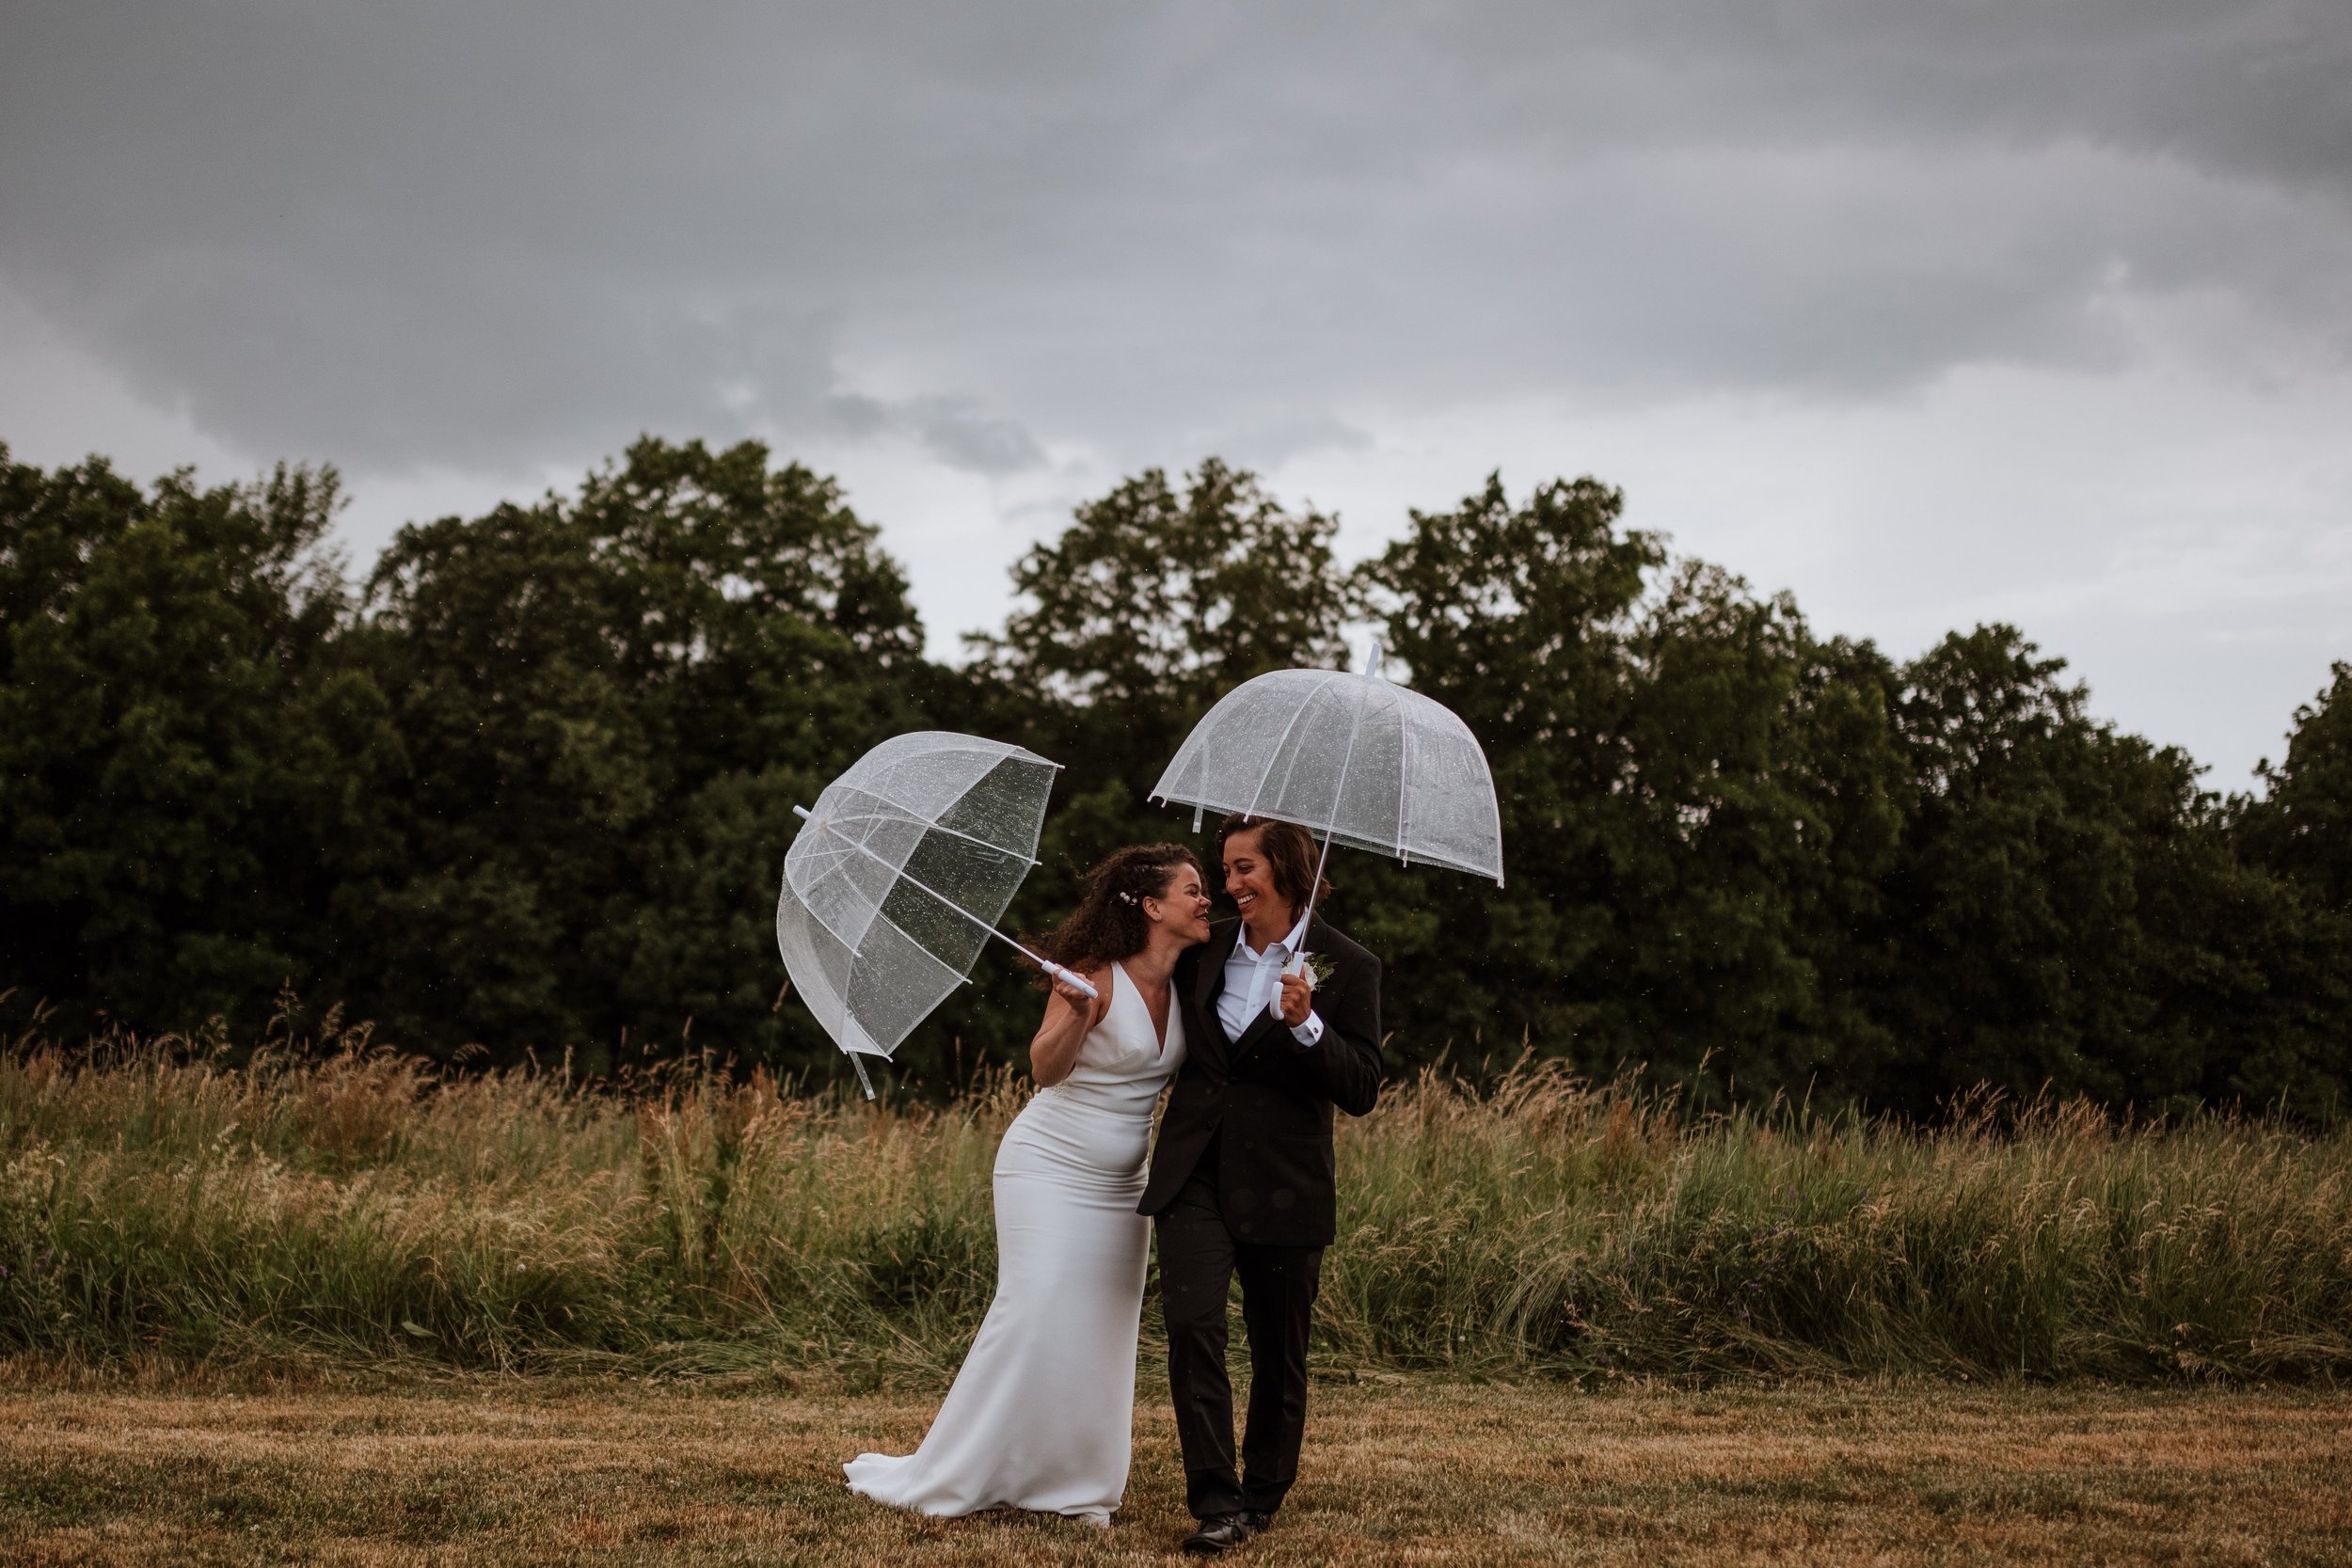 Newlywed lesbian couple laughing together under umbrellas while it's raining.